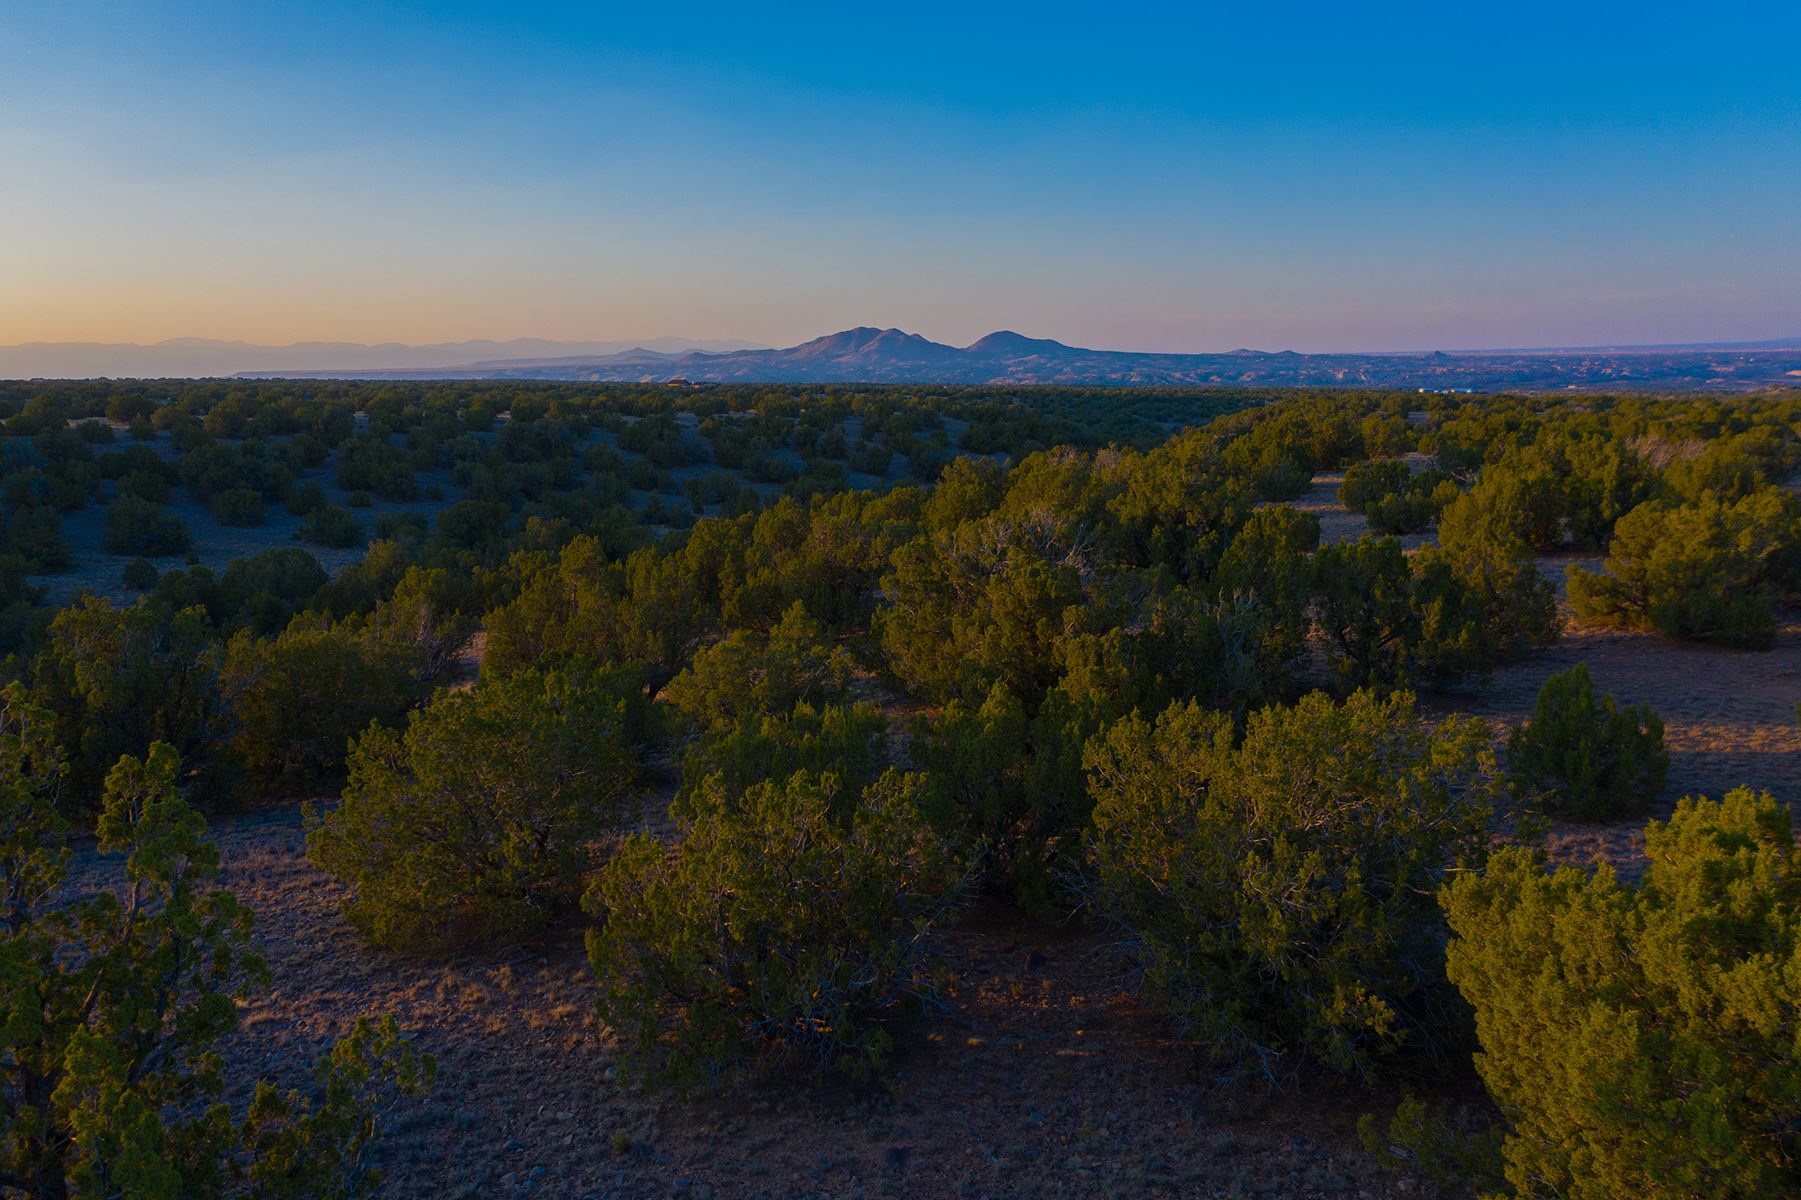 32 Silver Spur, Santa Fe, New Mexico 87010-1, ,Land,For Sale,32 Silver Spur,202004086